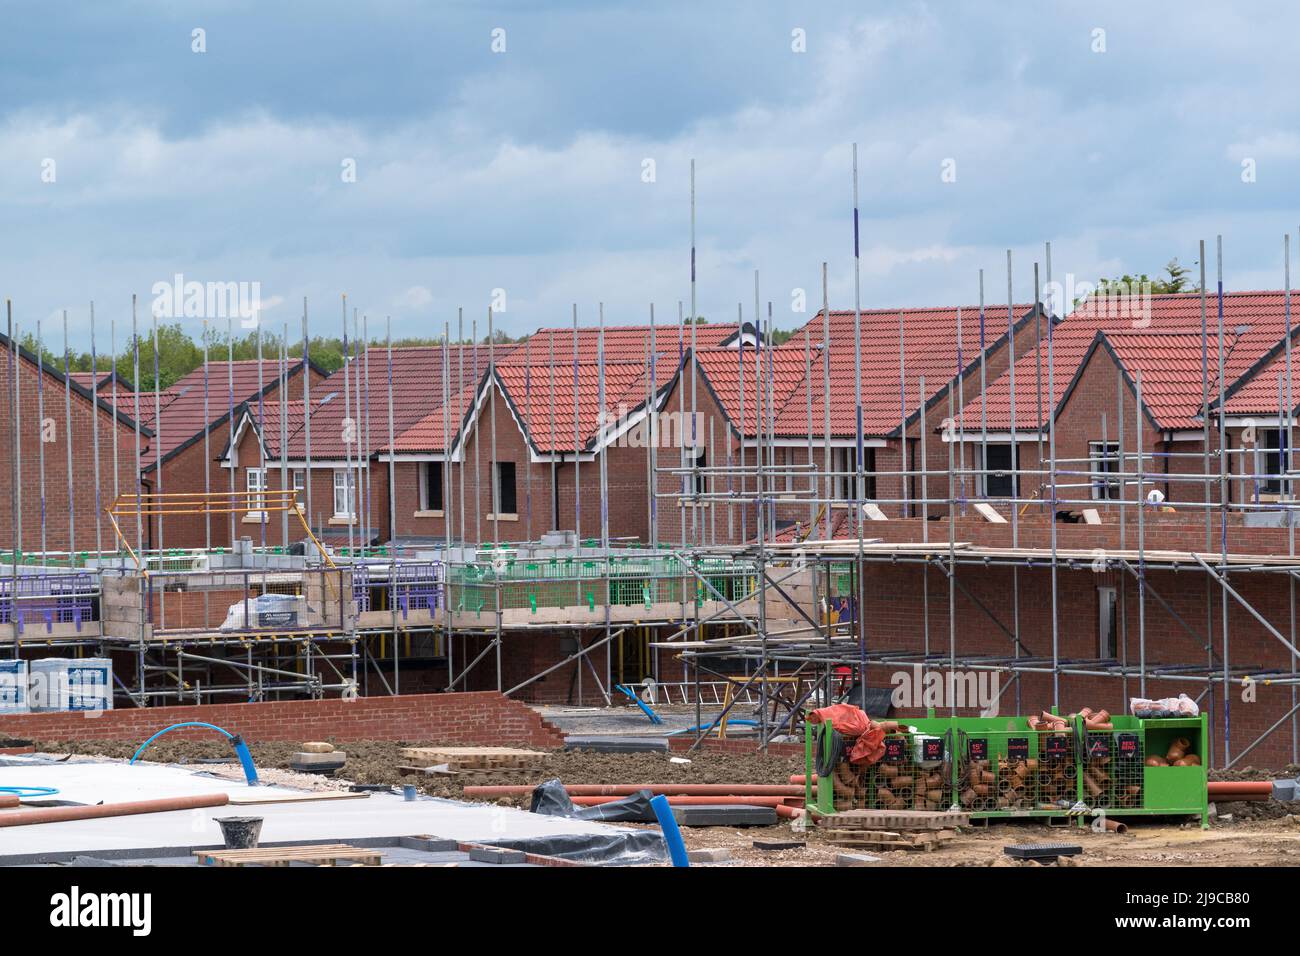 New Home Construction - Housing Development by Harron Homes in  Holmewood Derbyshire Stock Photo